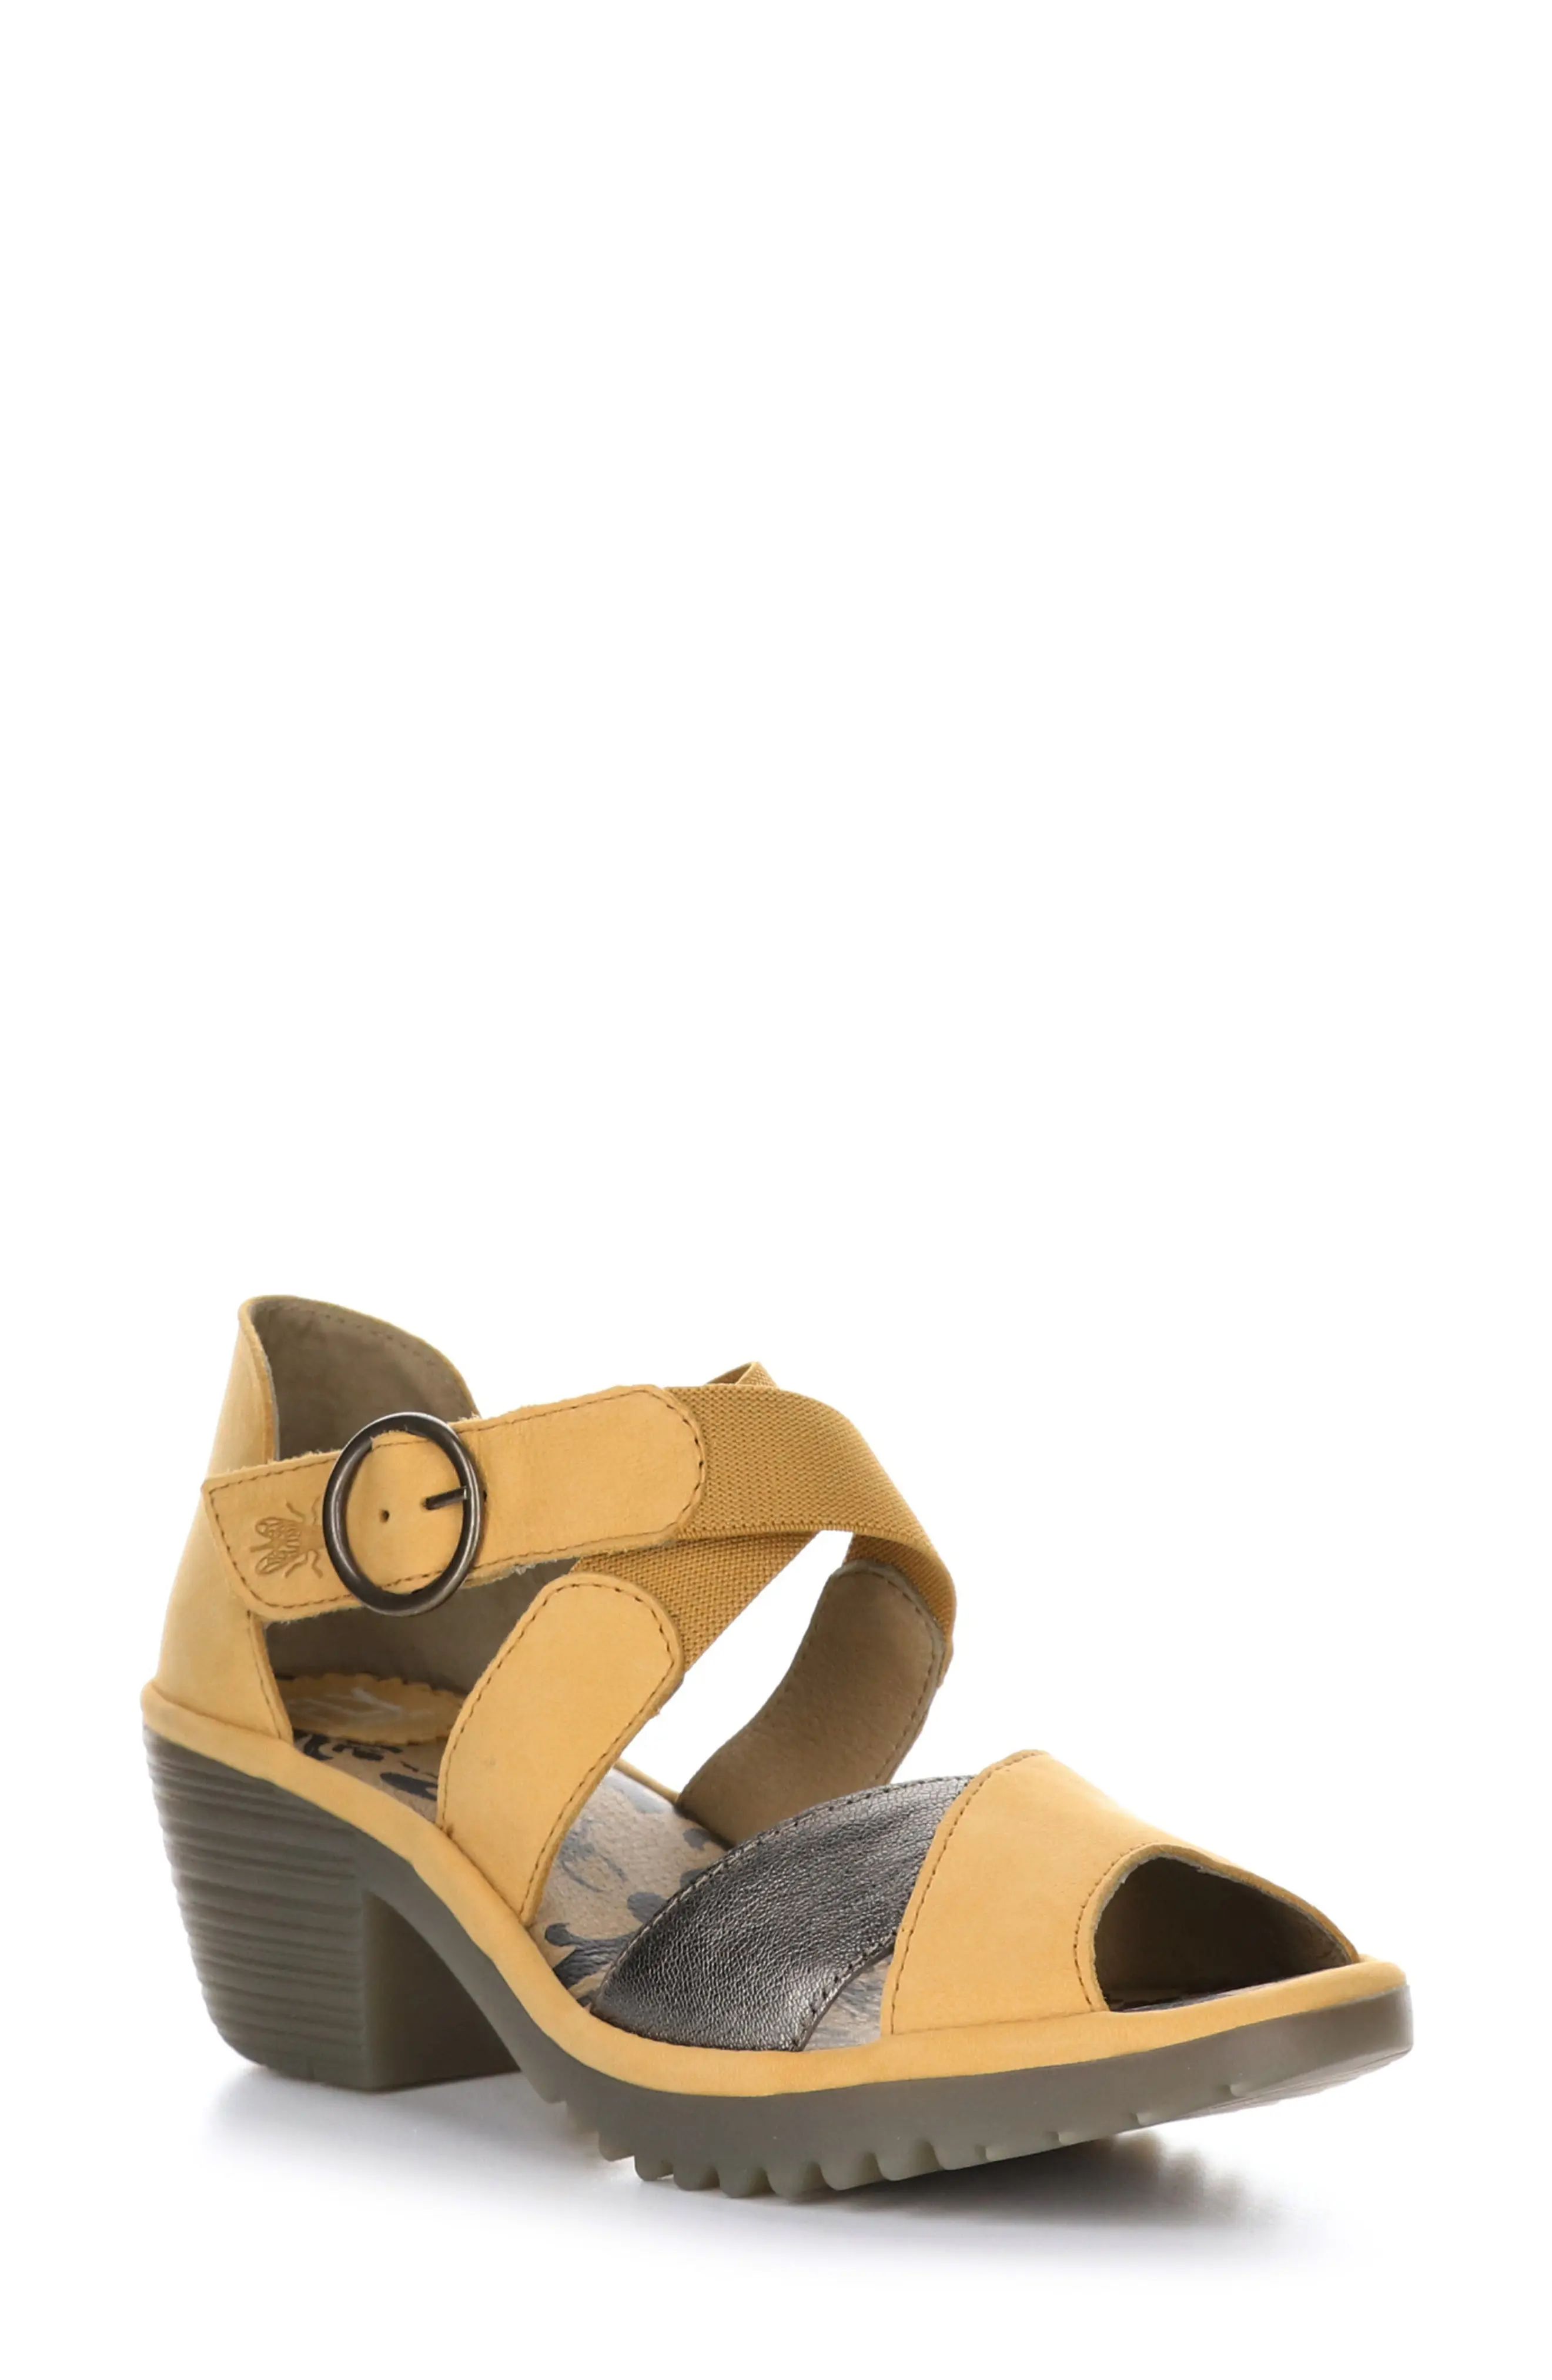 Women's Fly London Waid Sandal, Size 5.5-6US - Yellow | Nordstrom